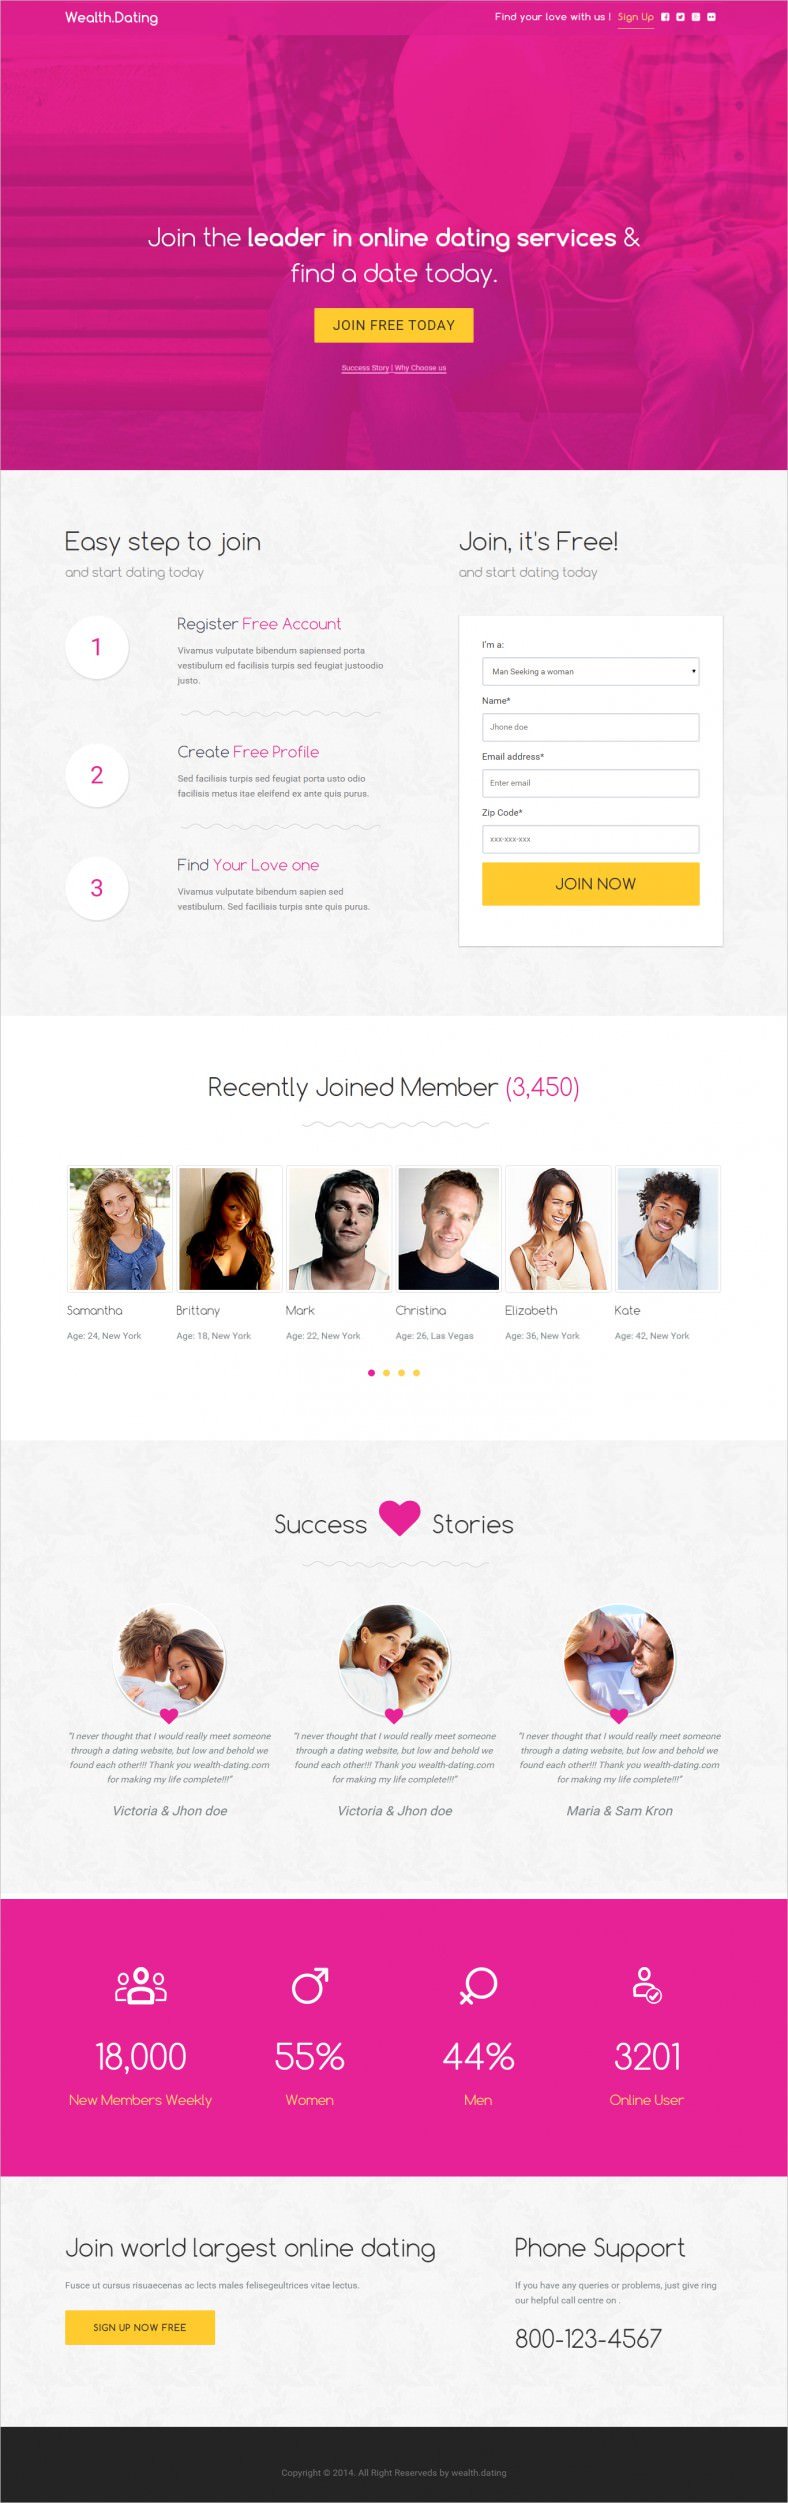 bootstrap responsive dating landing page template 788x2503